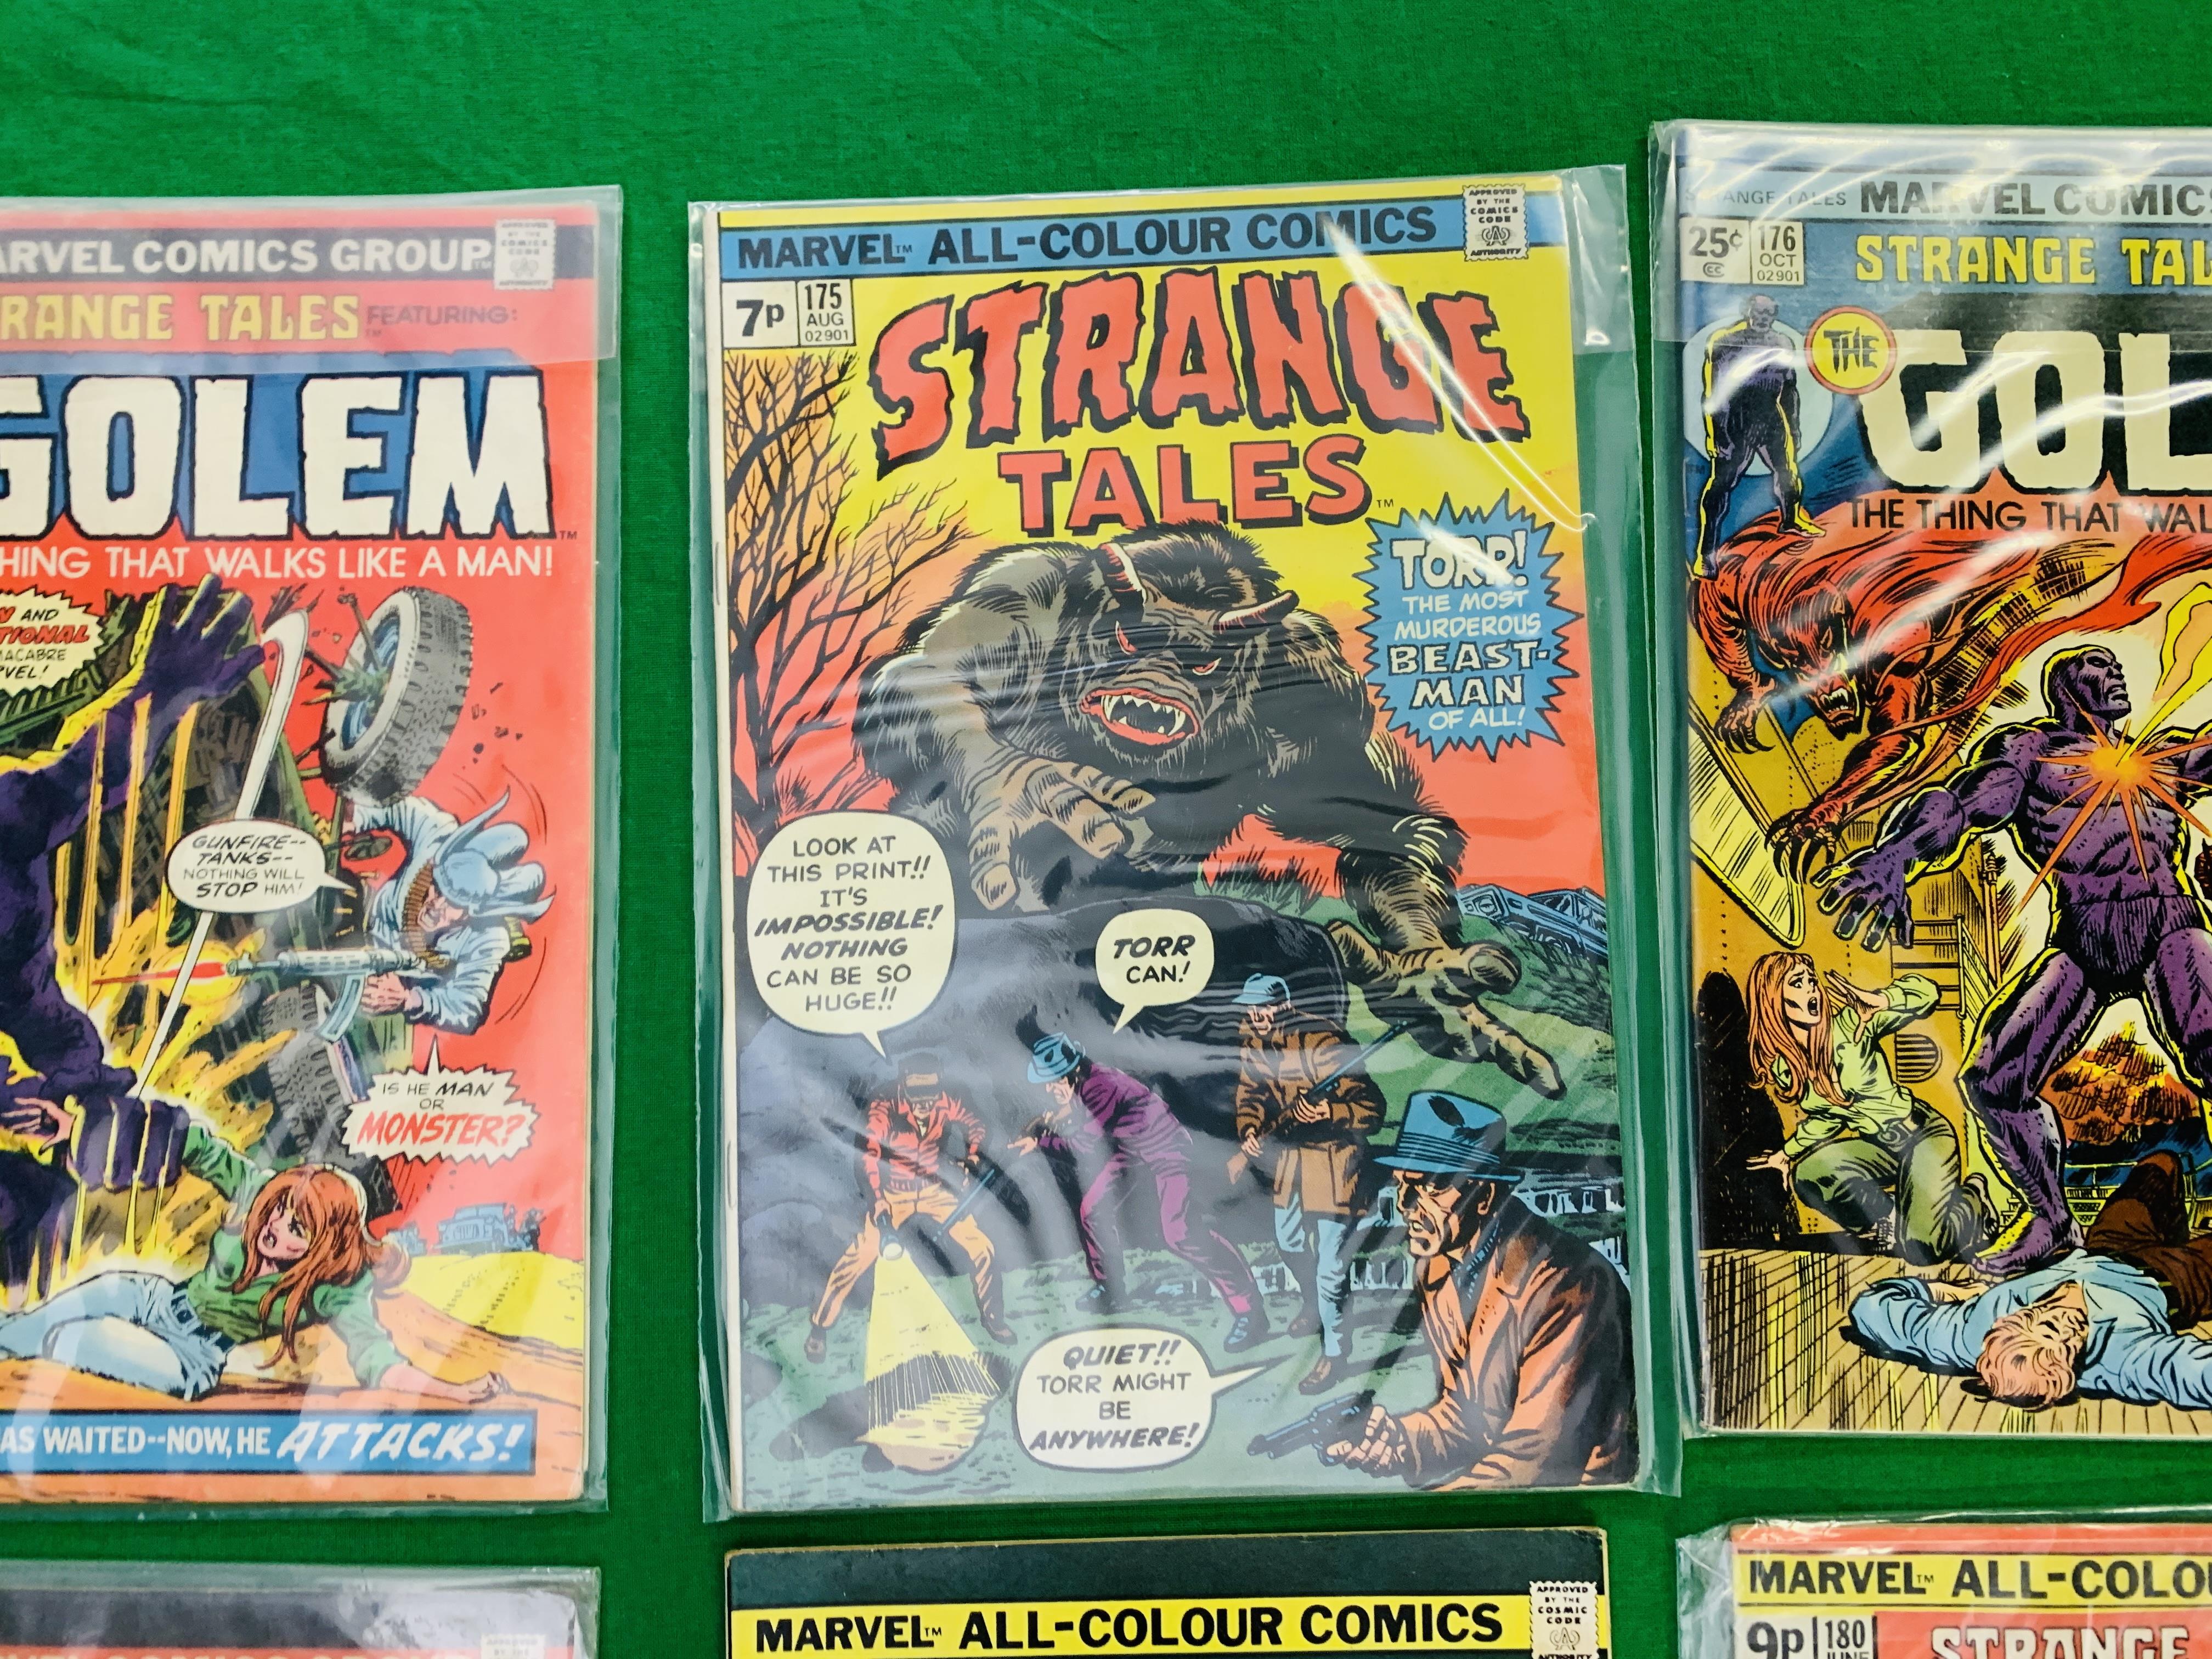 MARVEL STRANGE TALES, NO. 174 - 181, 184, 186. FROM 1974. NO. 178 IS THE FIRST APPEARANCE OF MAGNUS. - Image 3 of 11